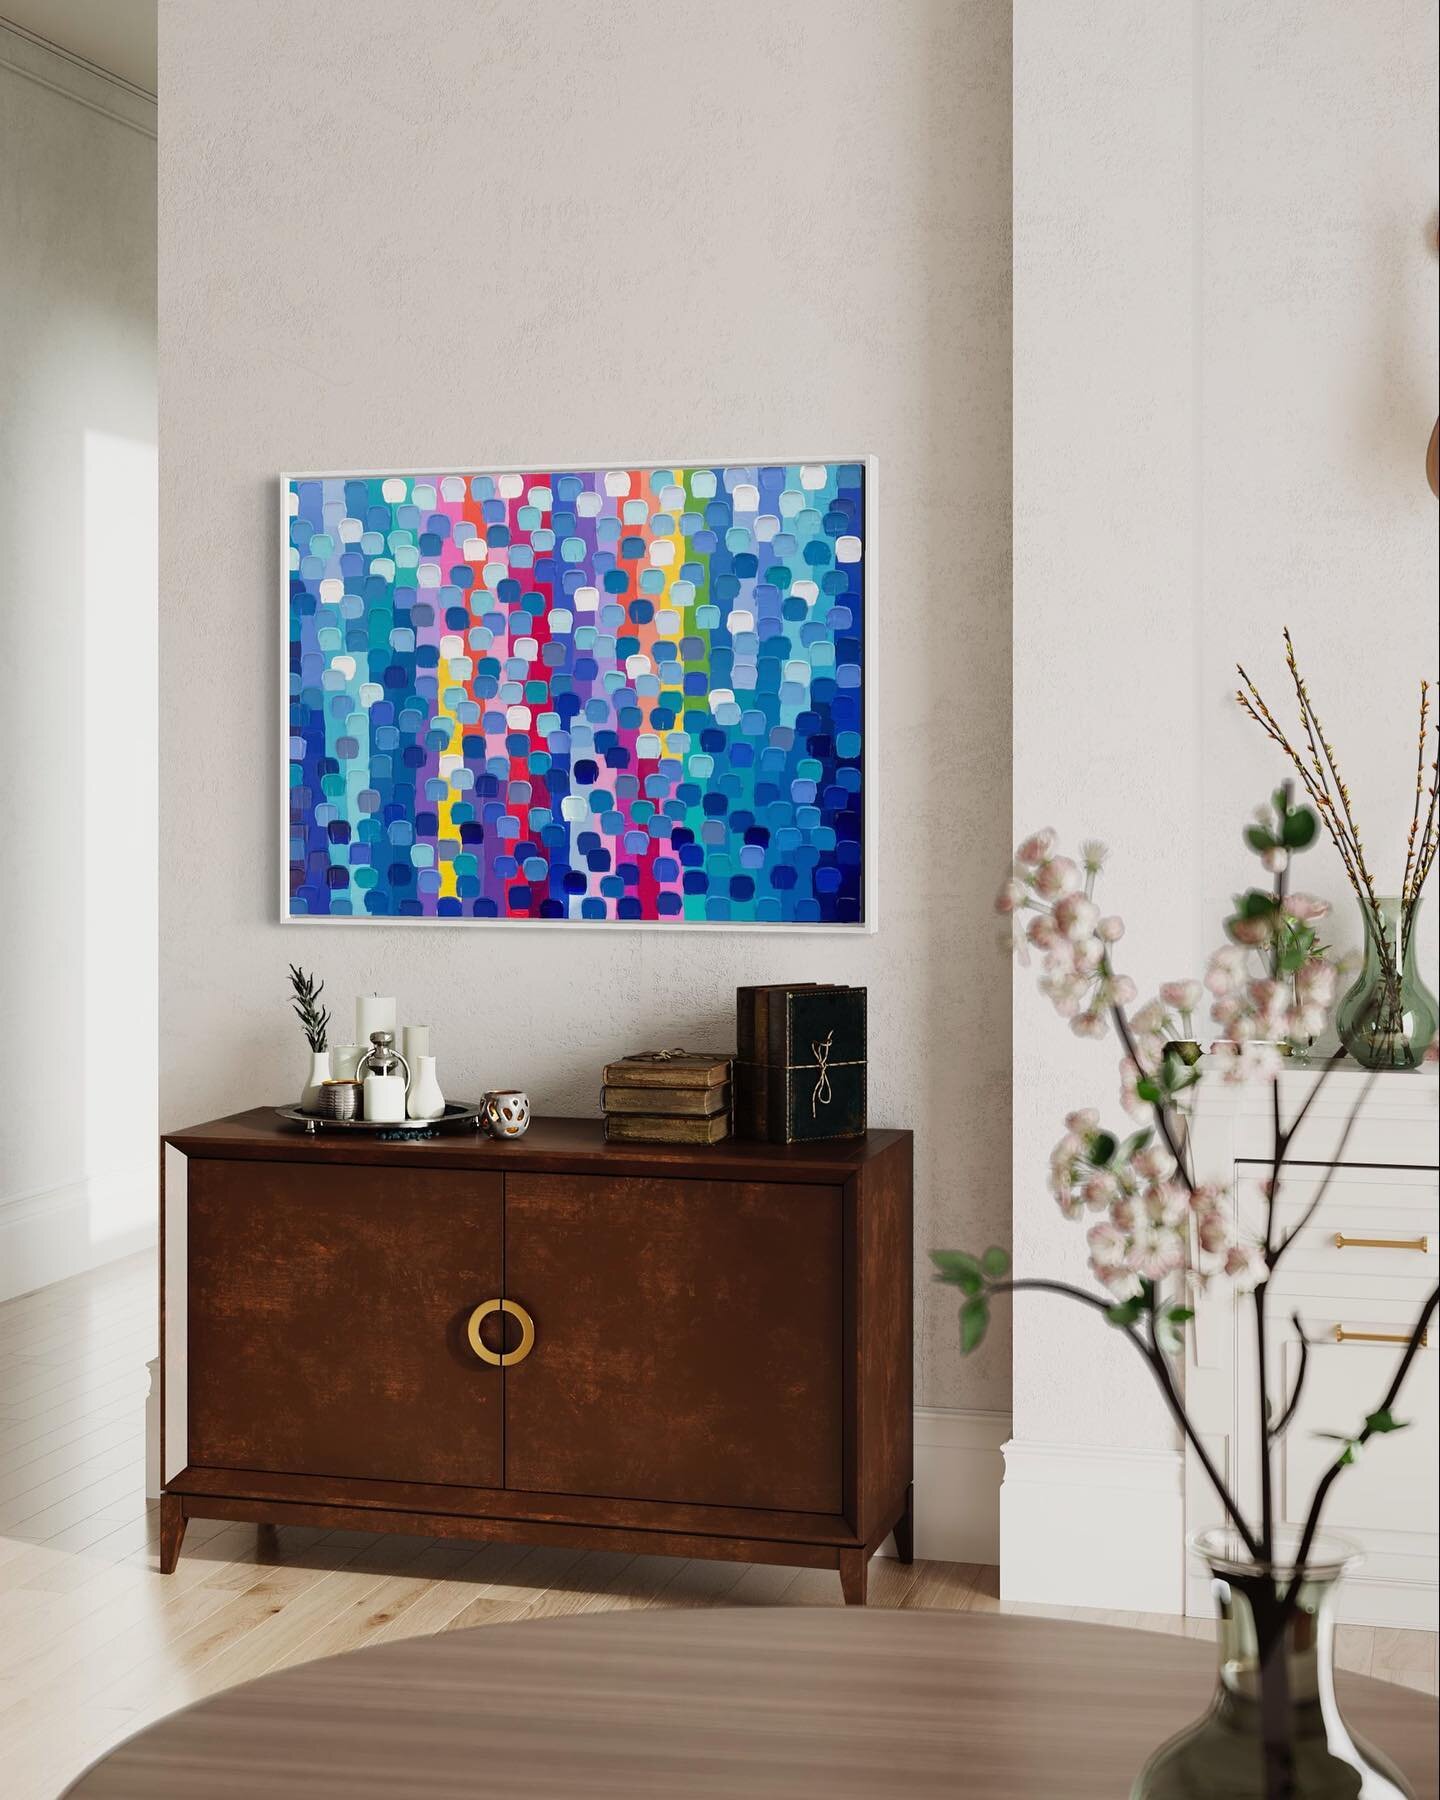 ✨ Decorate with joyful colour! ✨

&lsquo;Jackpot&rsquo;
30 x 40
Acrylic on Canvas

SWIPE 👉🏻 to see how this painting looks in various settings!

#art #artwork #artist #painting #abstractart #abstractpainting #abstract #contemporaryart #contemporary